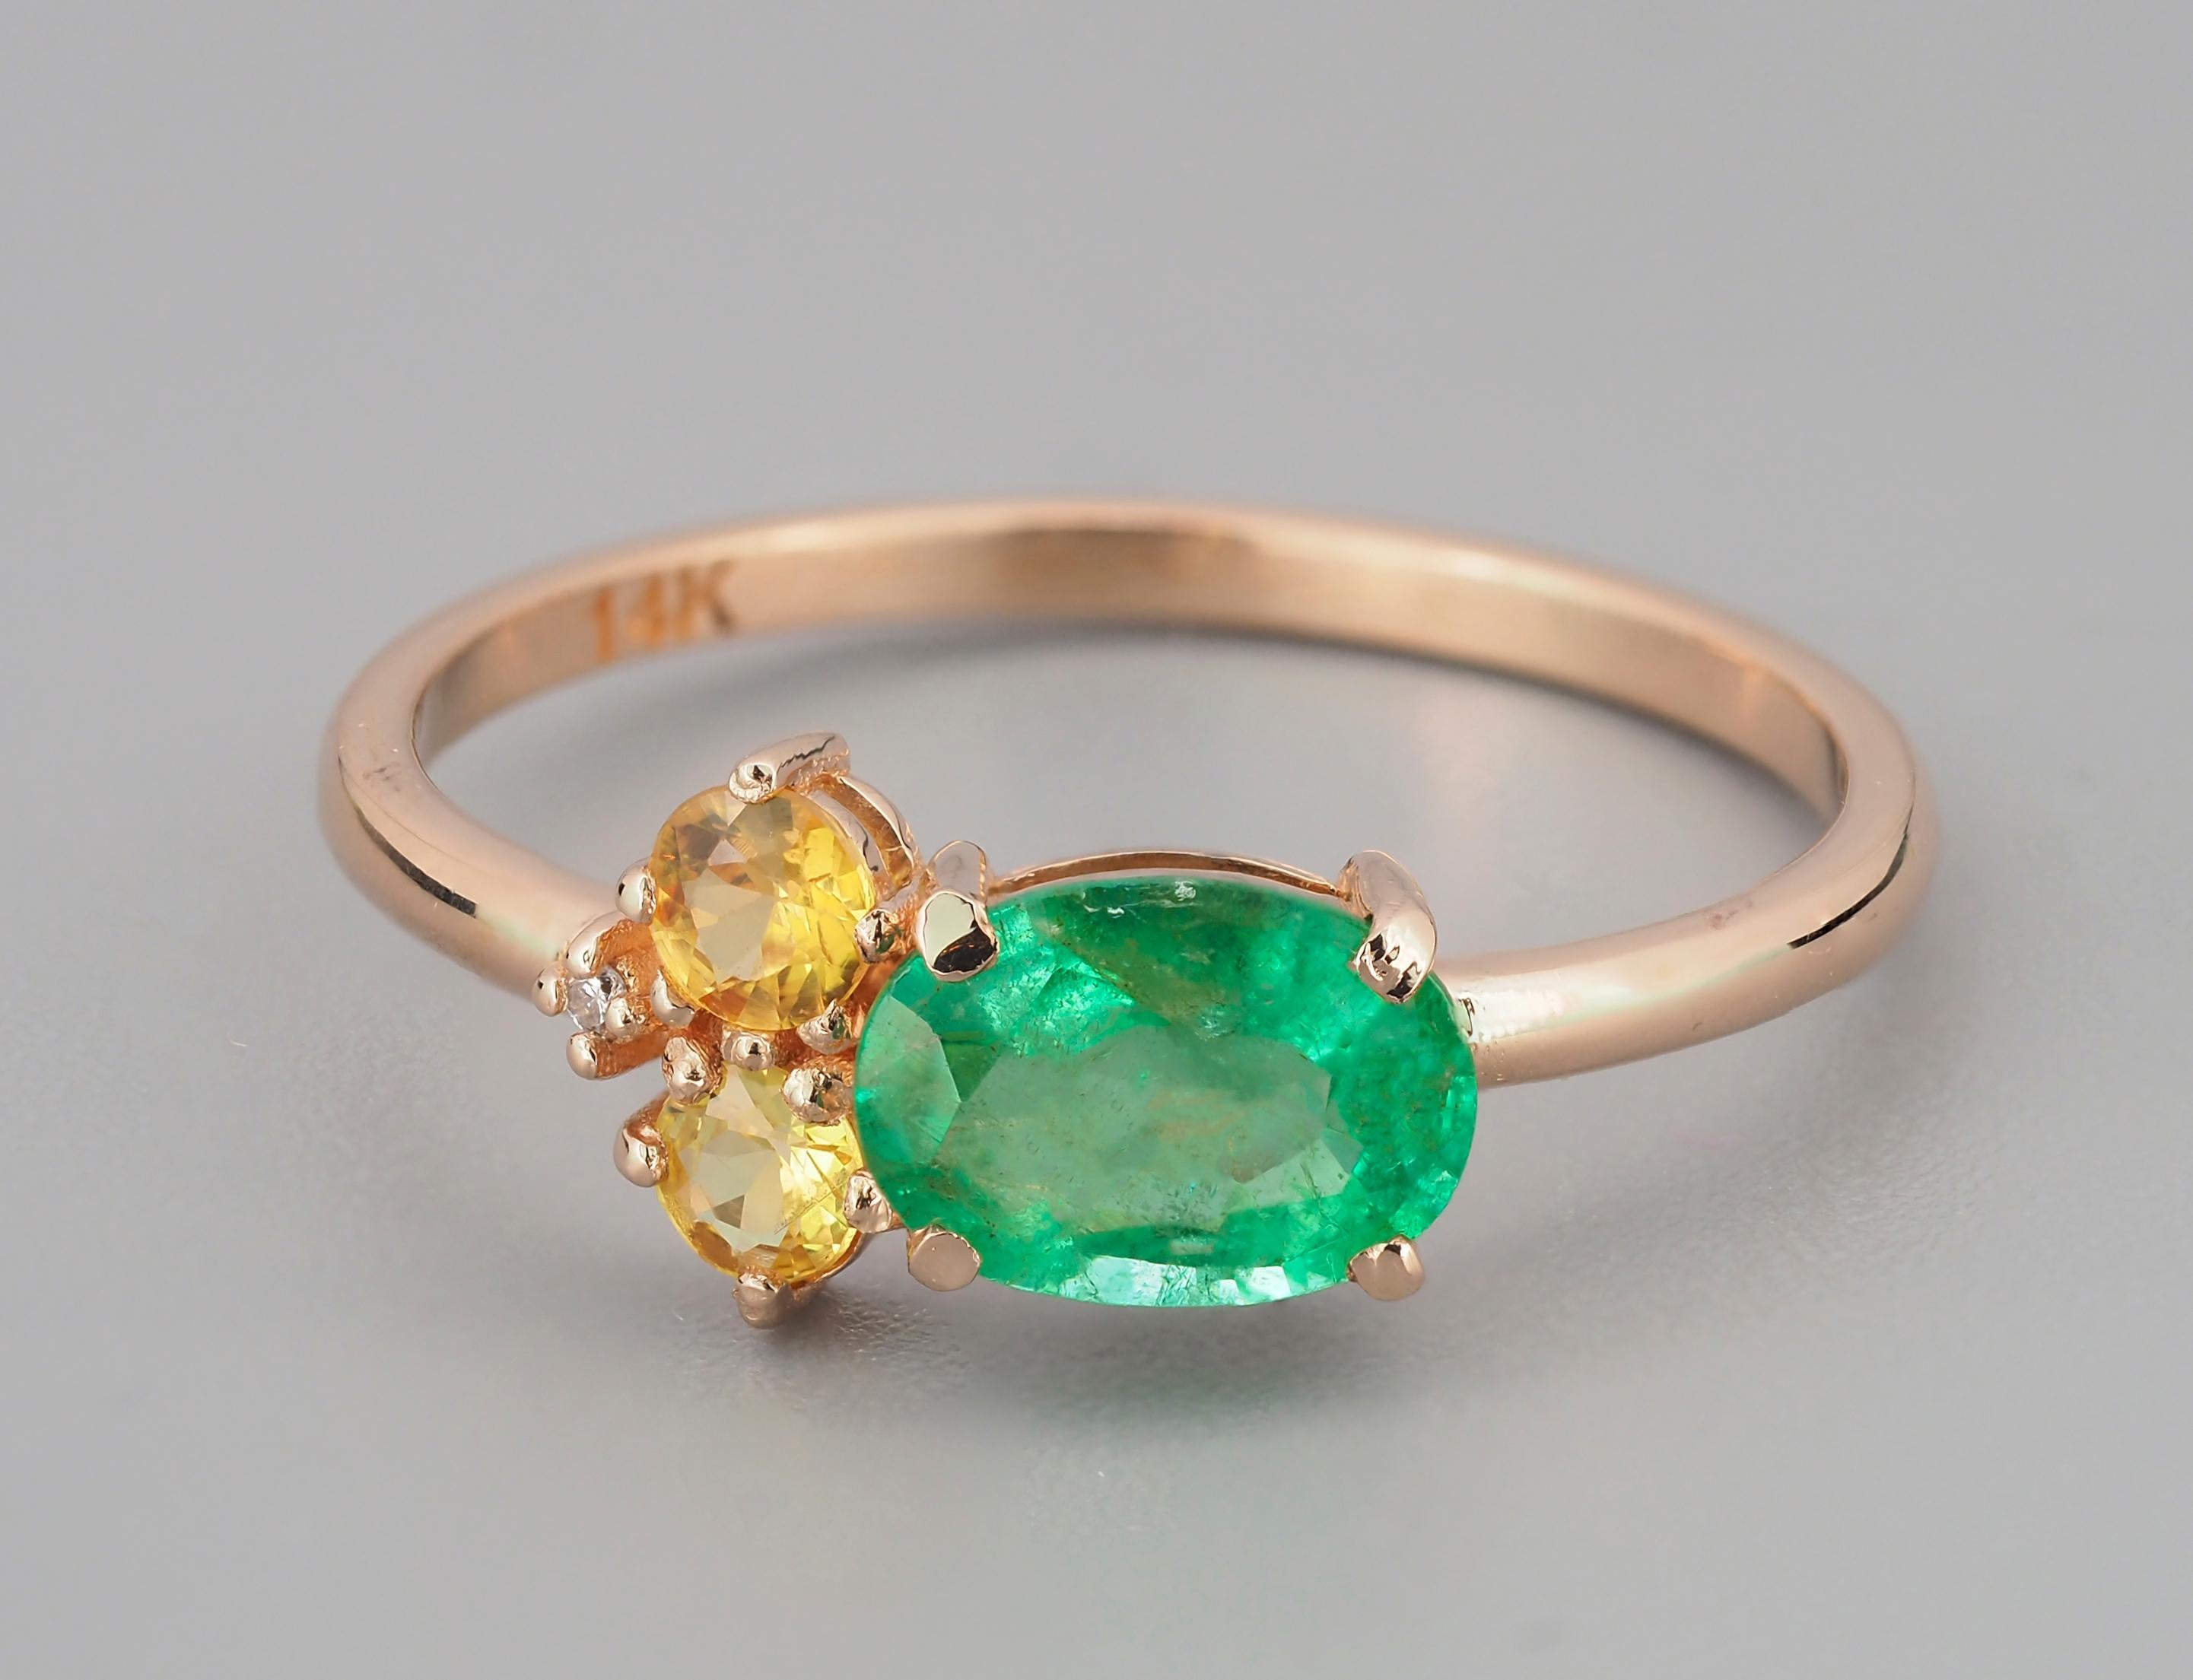 Oval emerald, sapphire and diamonds 14k gold ring. 
Emerald gold ring. Emerald cluster ring.

Metal: 14k solid gold.
Weight: 1.8 (depends from size).

Set with emerald color - green
oval cut, aprox 0.80 ct
Clarity: Transparent with